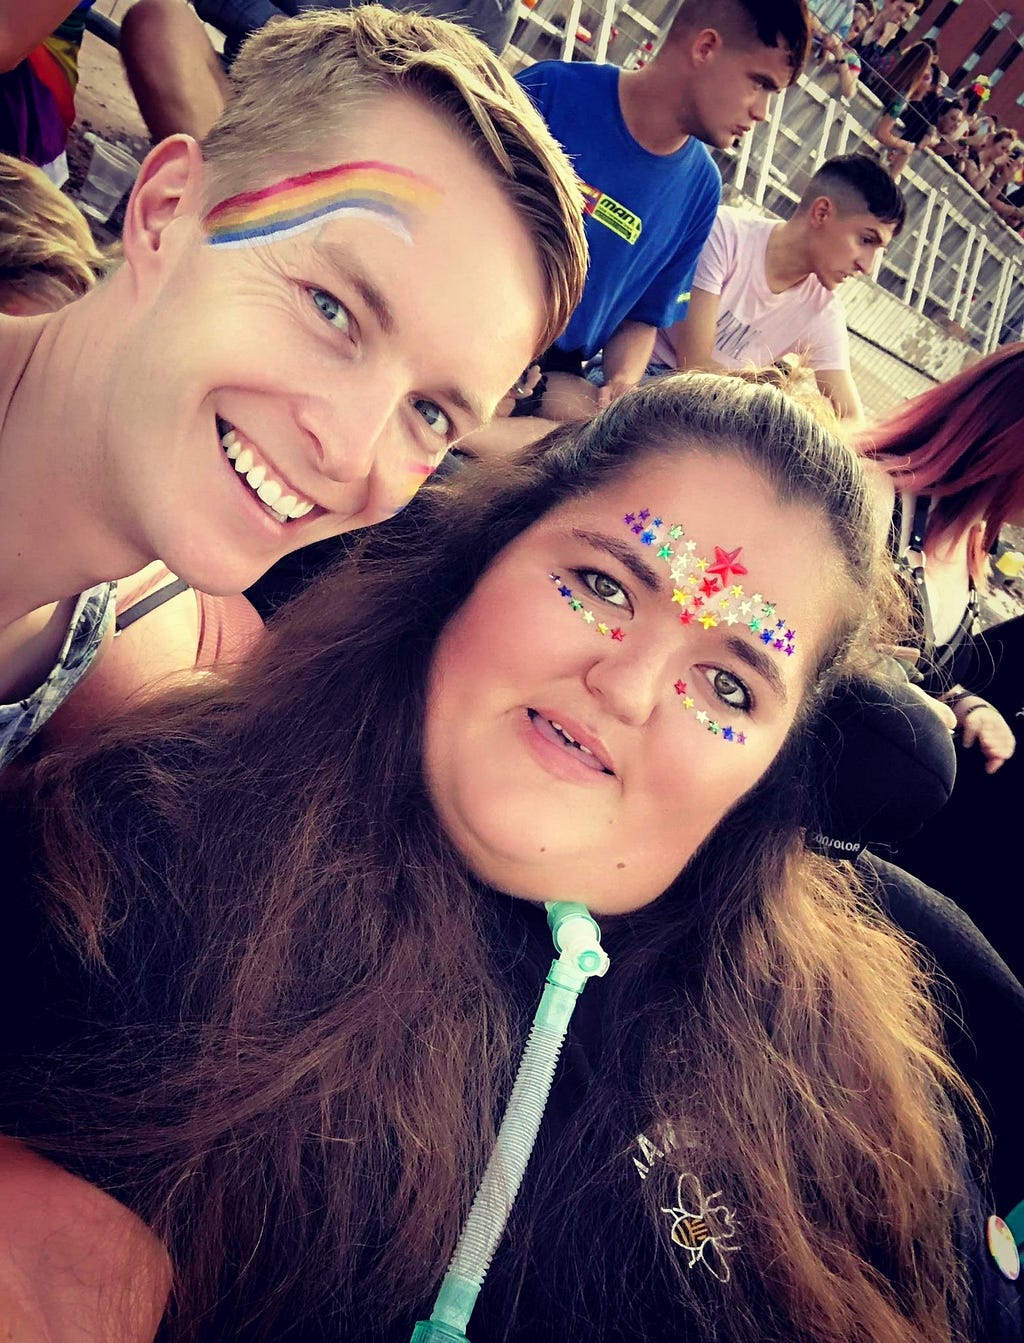 A man and woman smile at the camera. Both have rainbow paint and glitter on their faces. The woman is a wheelchair user.